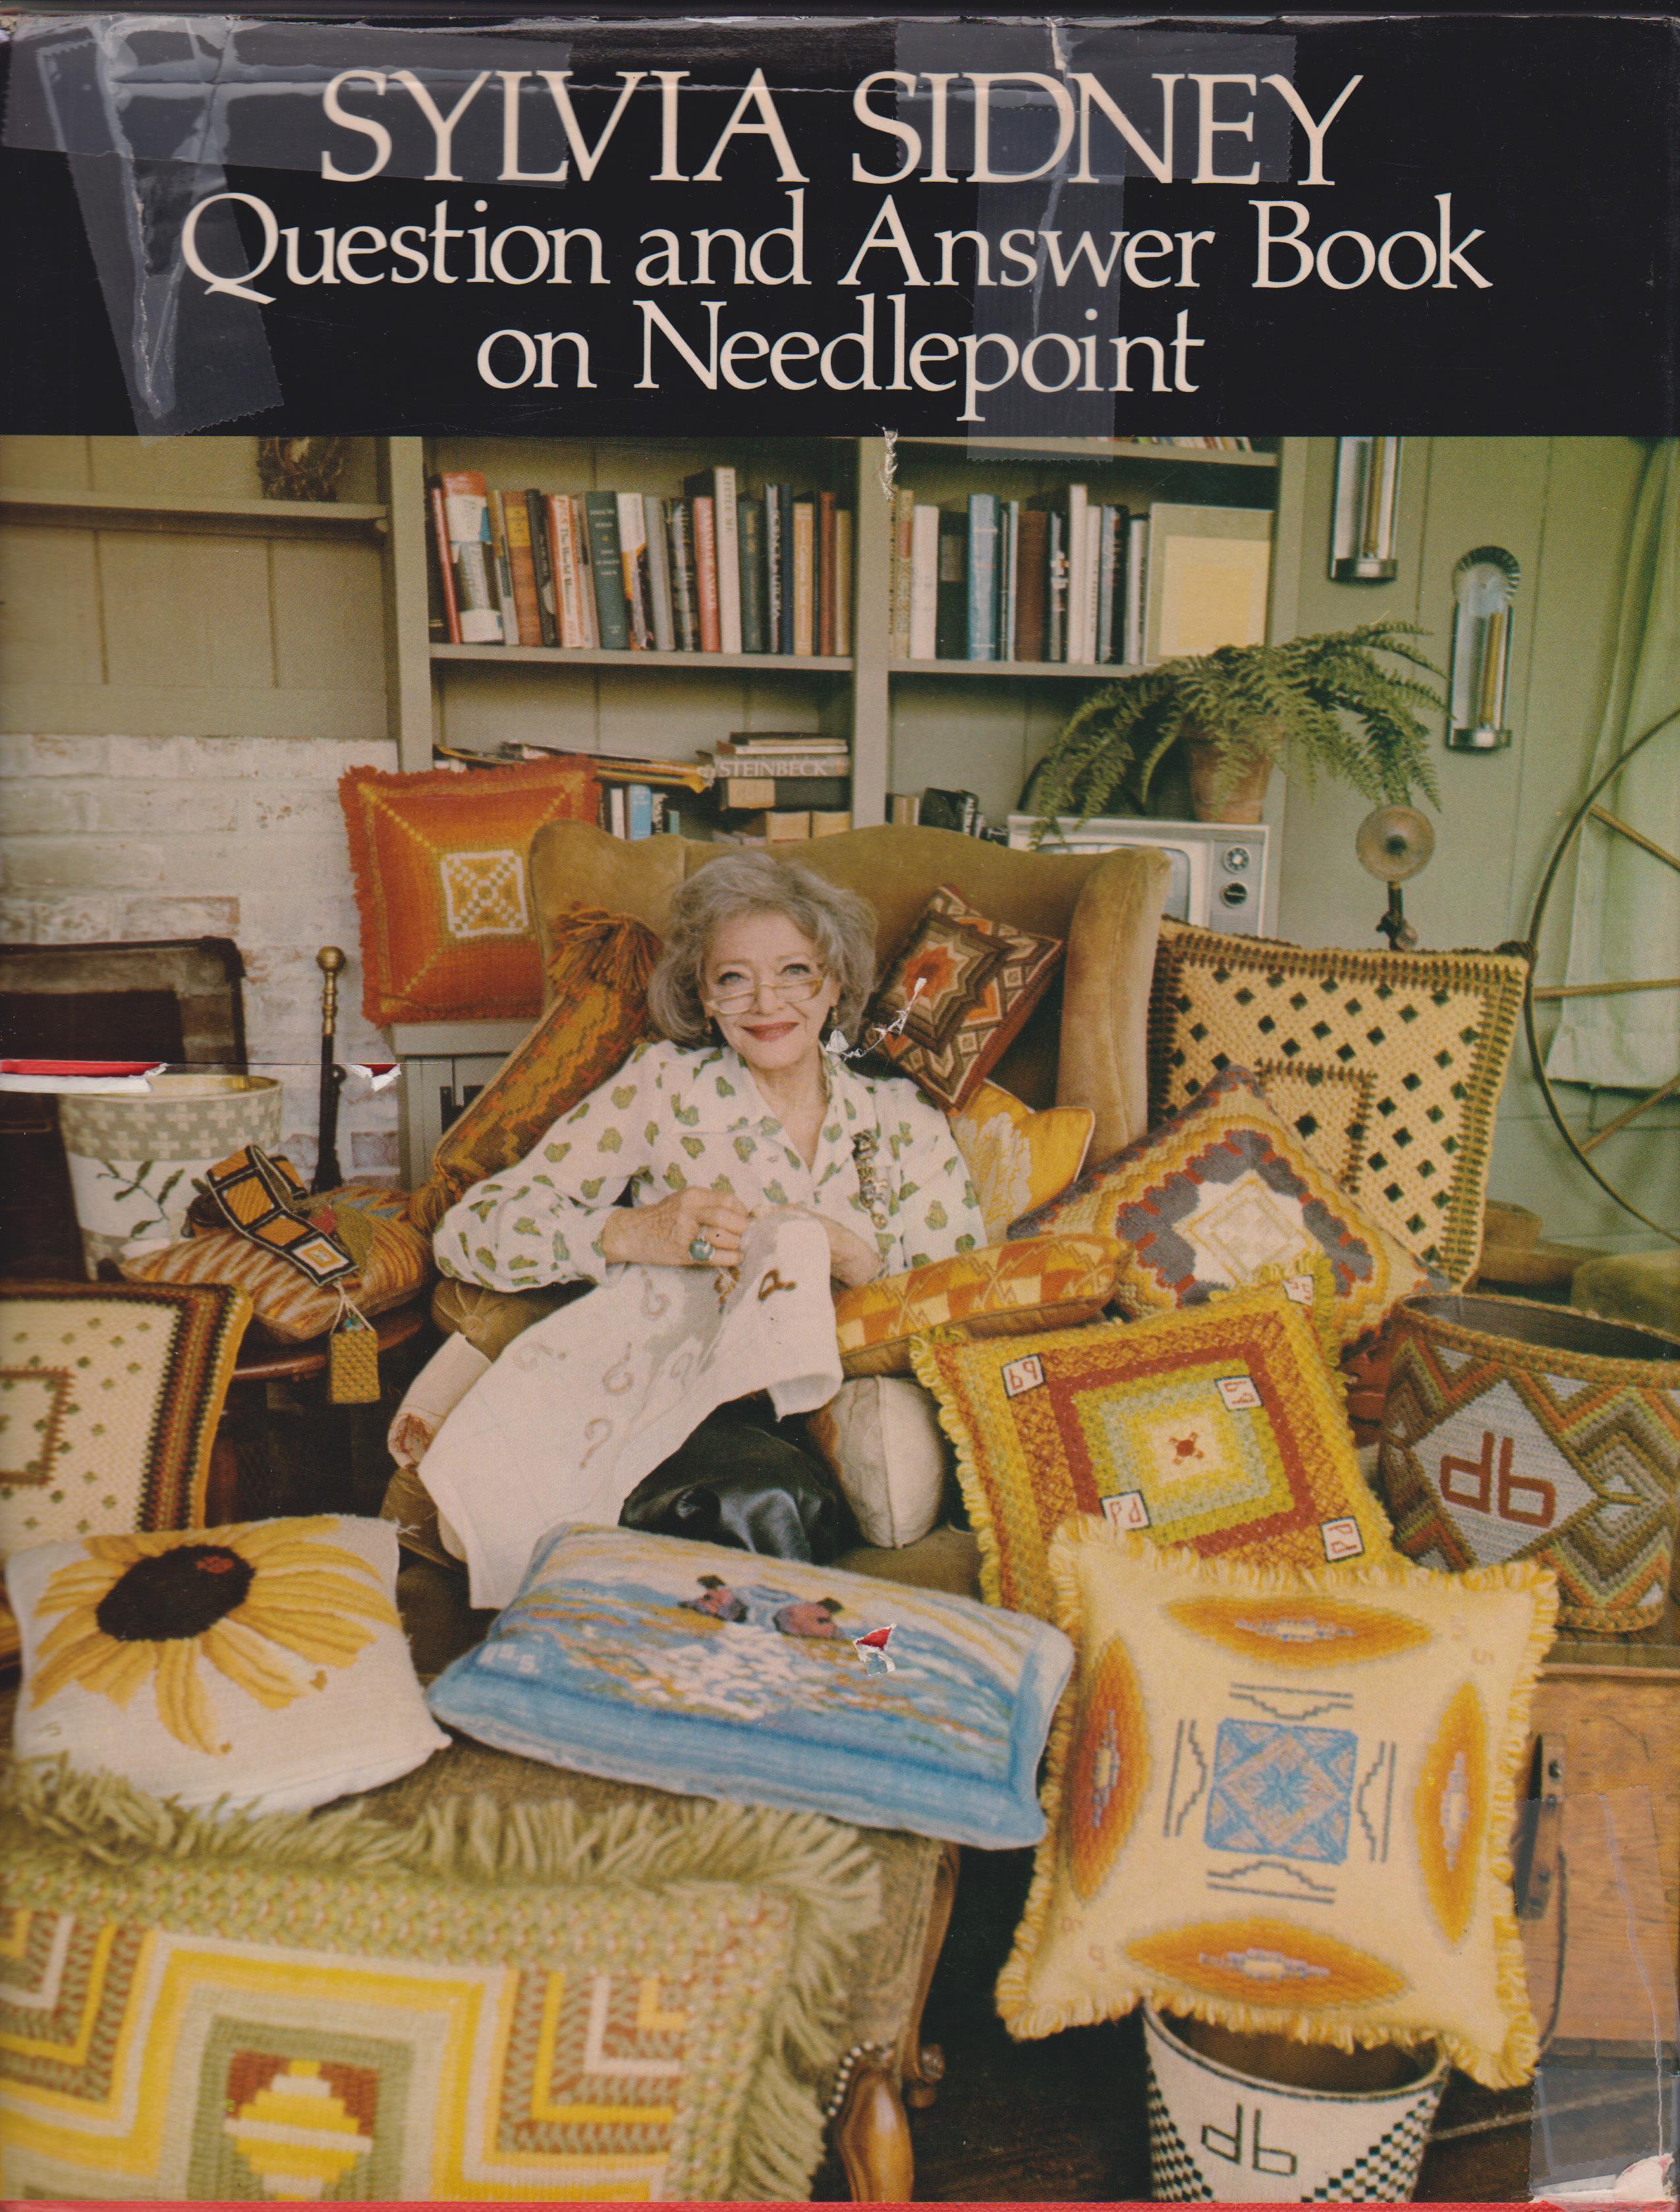 BIBLIO, Question and Answer Book on Needlepoint by Sidney, Sylvia, Hardcover, 1974, Van Nostrand Reinhold Co